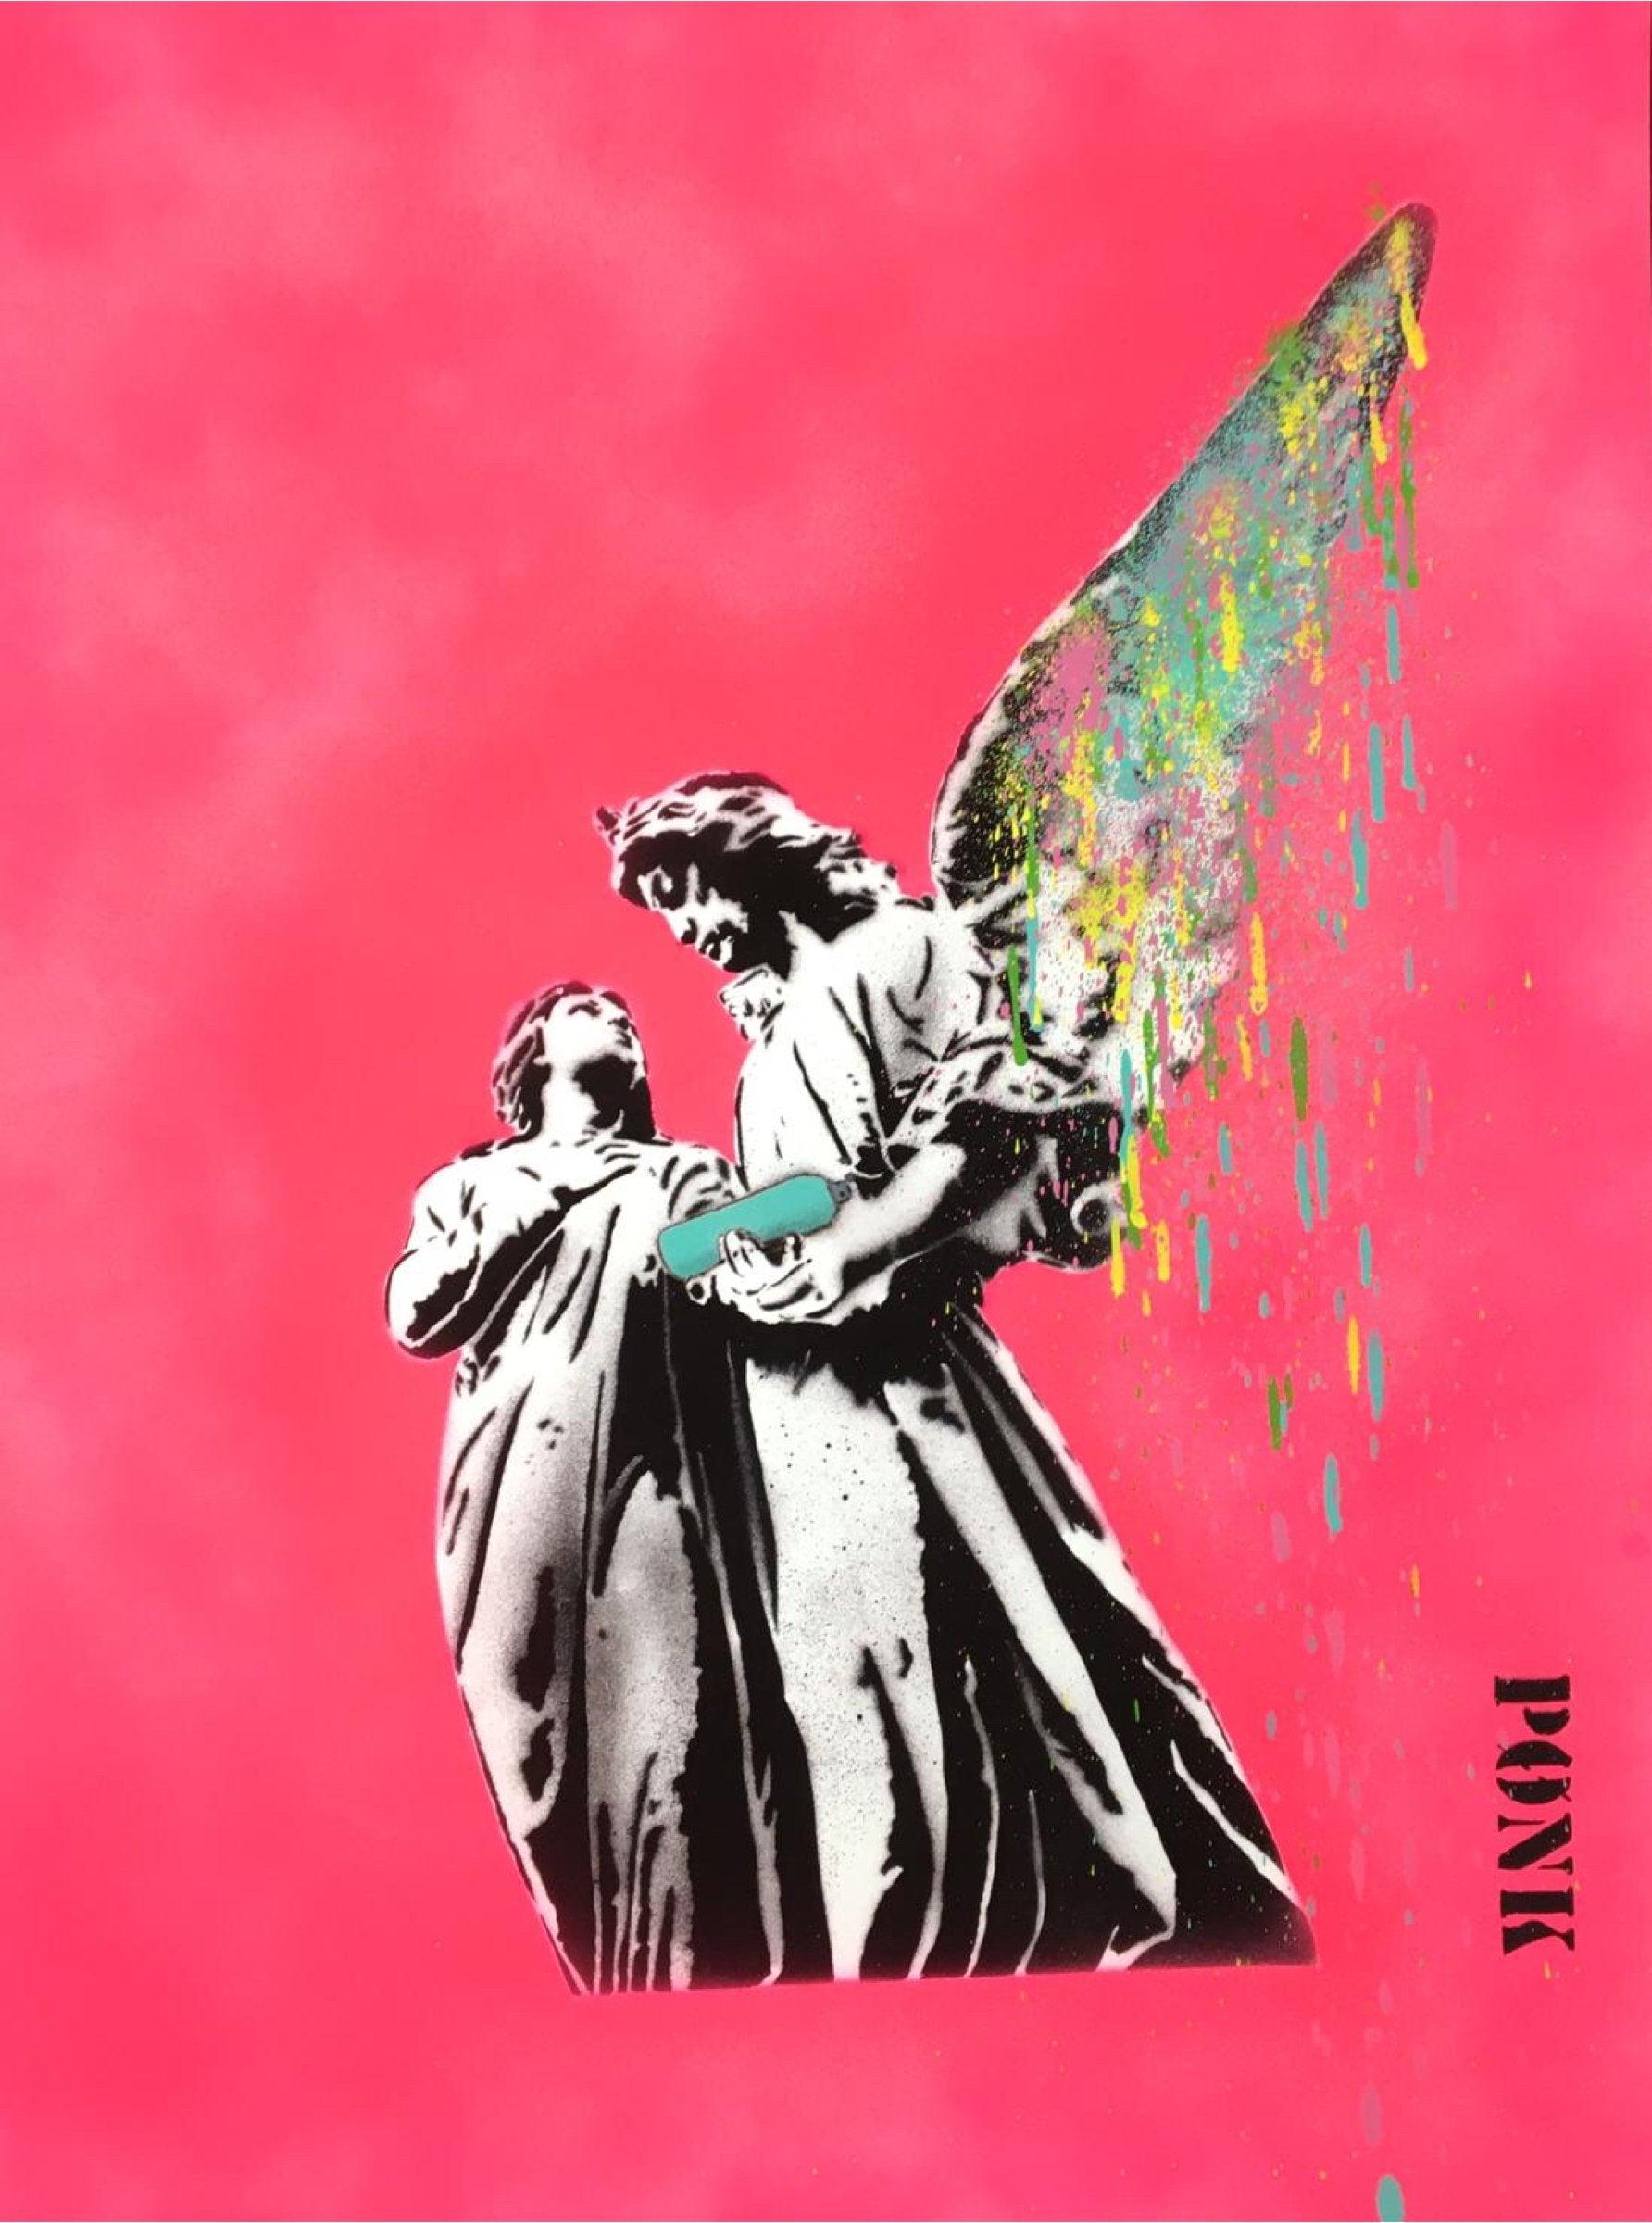 Spray for Love - 1/1 (Neon Pink), by PONK (Street Art), 2021